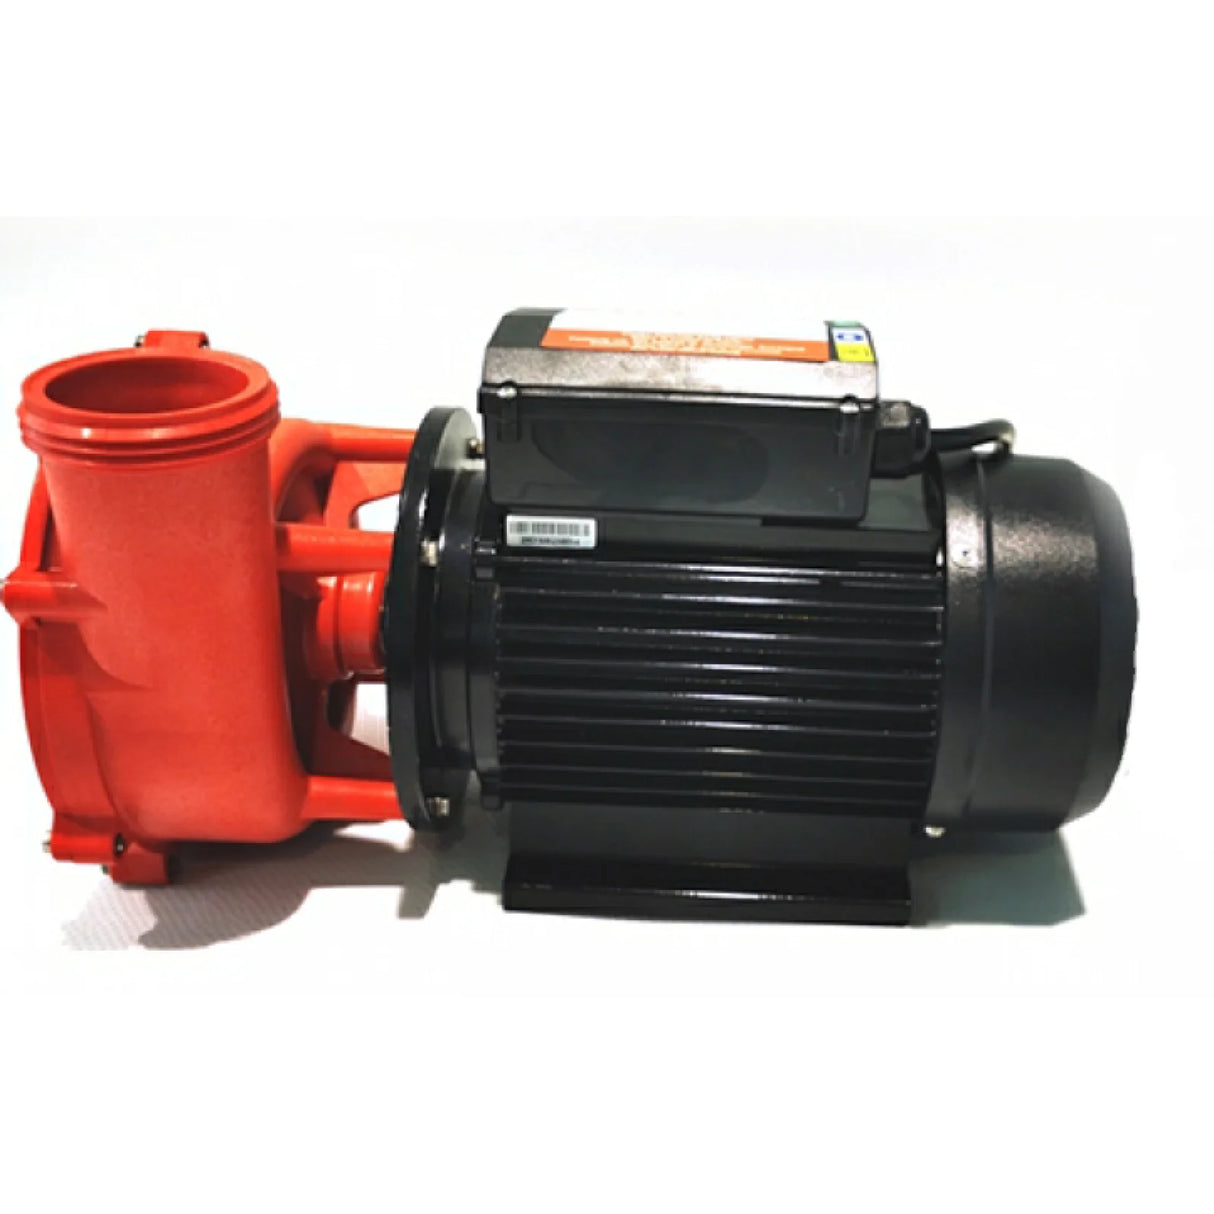 Piranha Spa Jet Pumps - 1 and 2 Speed - LP & WP Series - Heater and Spa Parts